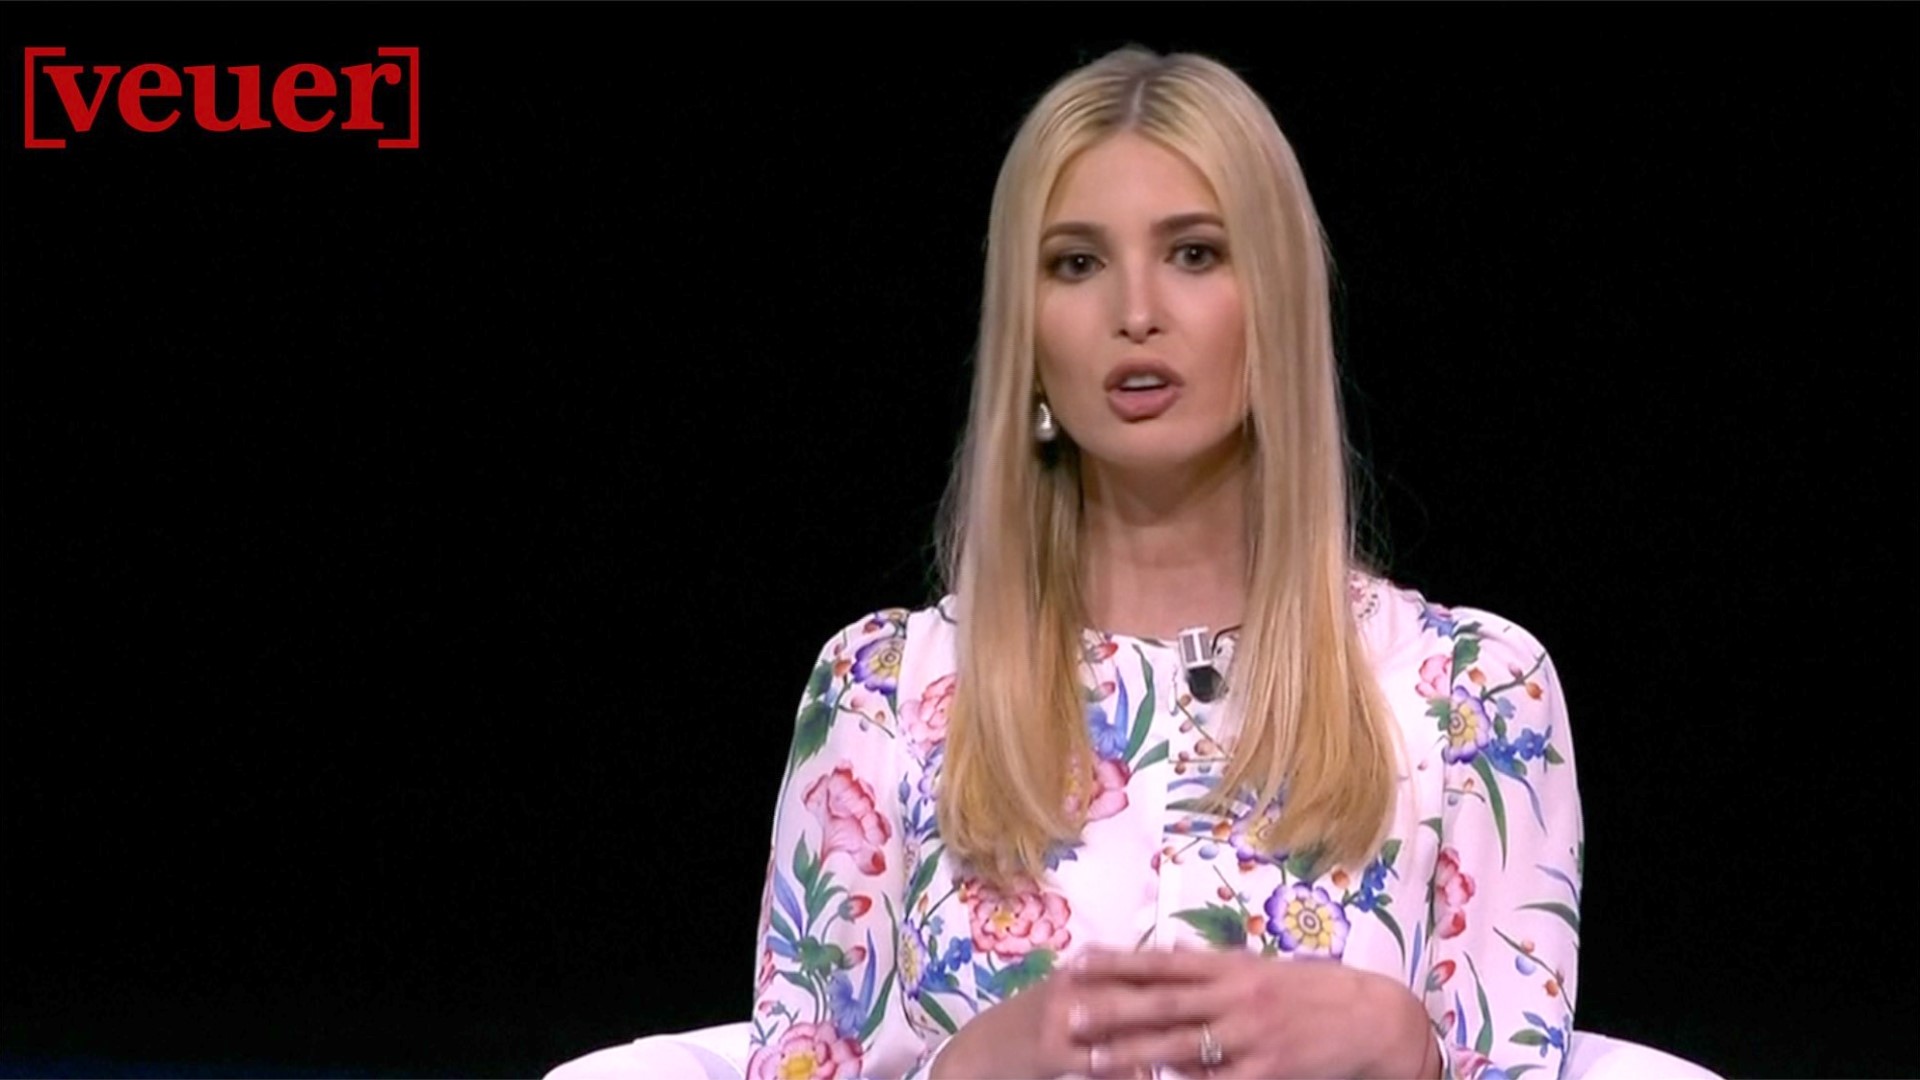 White House Senior Adviser Ivanka Trump has quietly been talking to members of Congress in the wake of the mass shootings in El Paso, Texas and Dayton, Ohio to gauge where lawmakers stand. Veuer's Chandra Lanier has more.